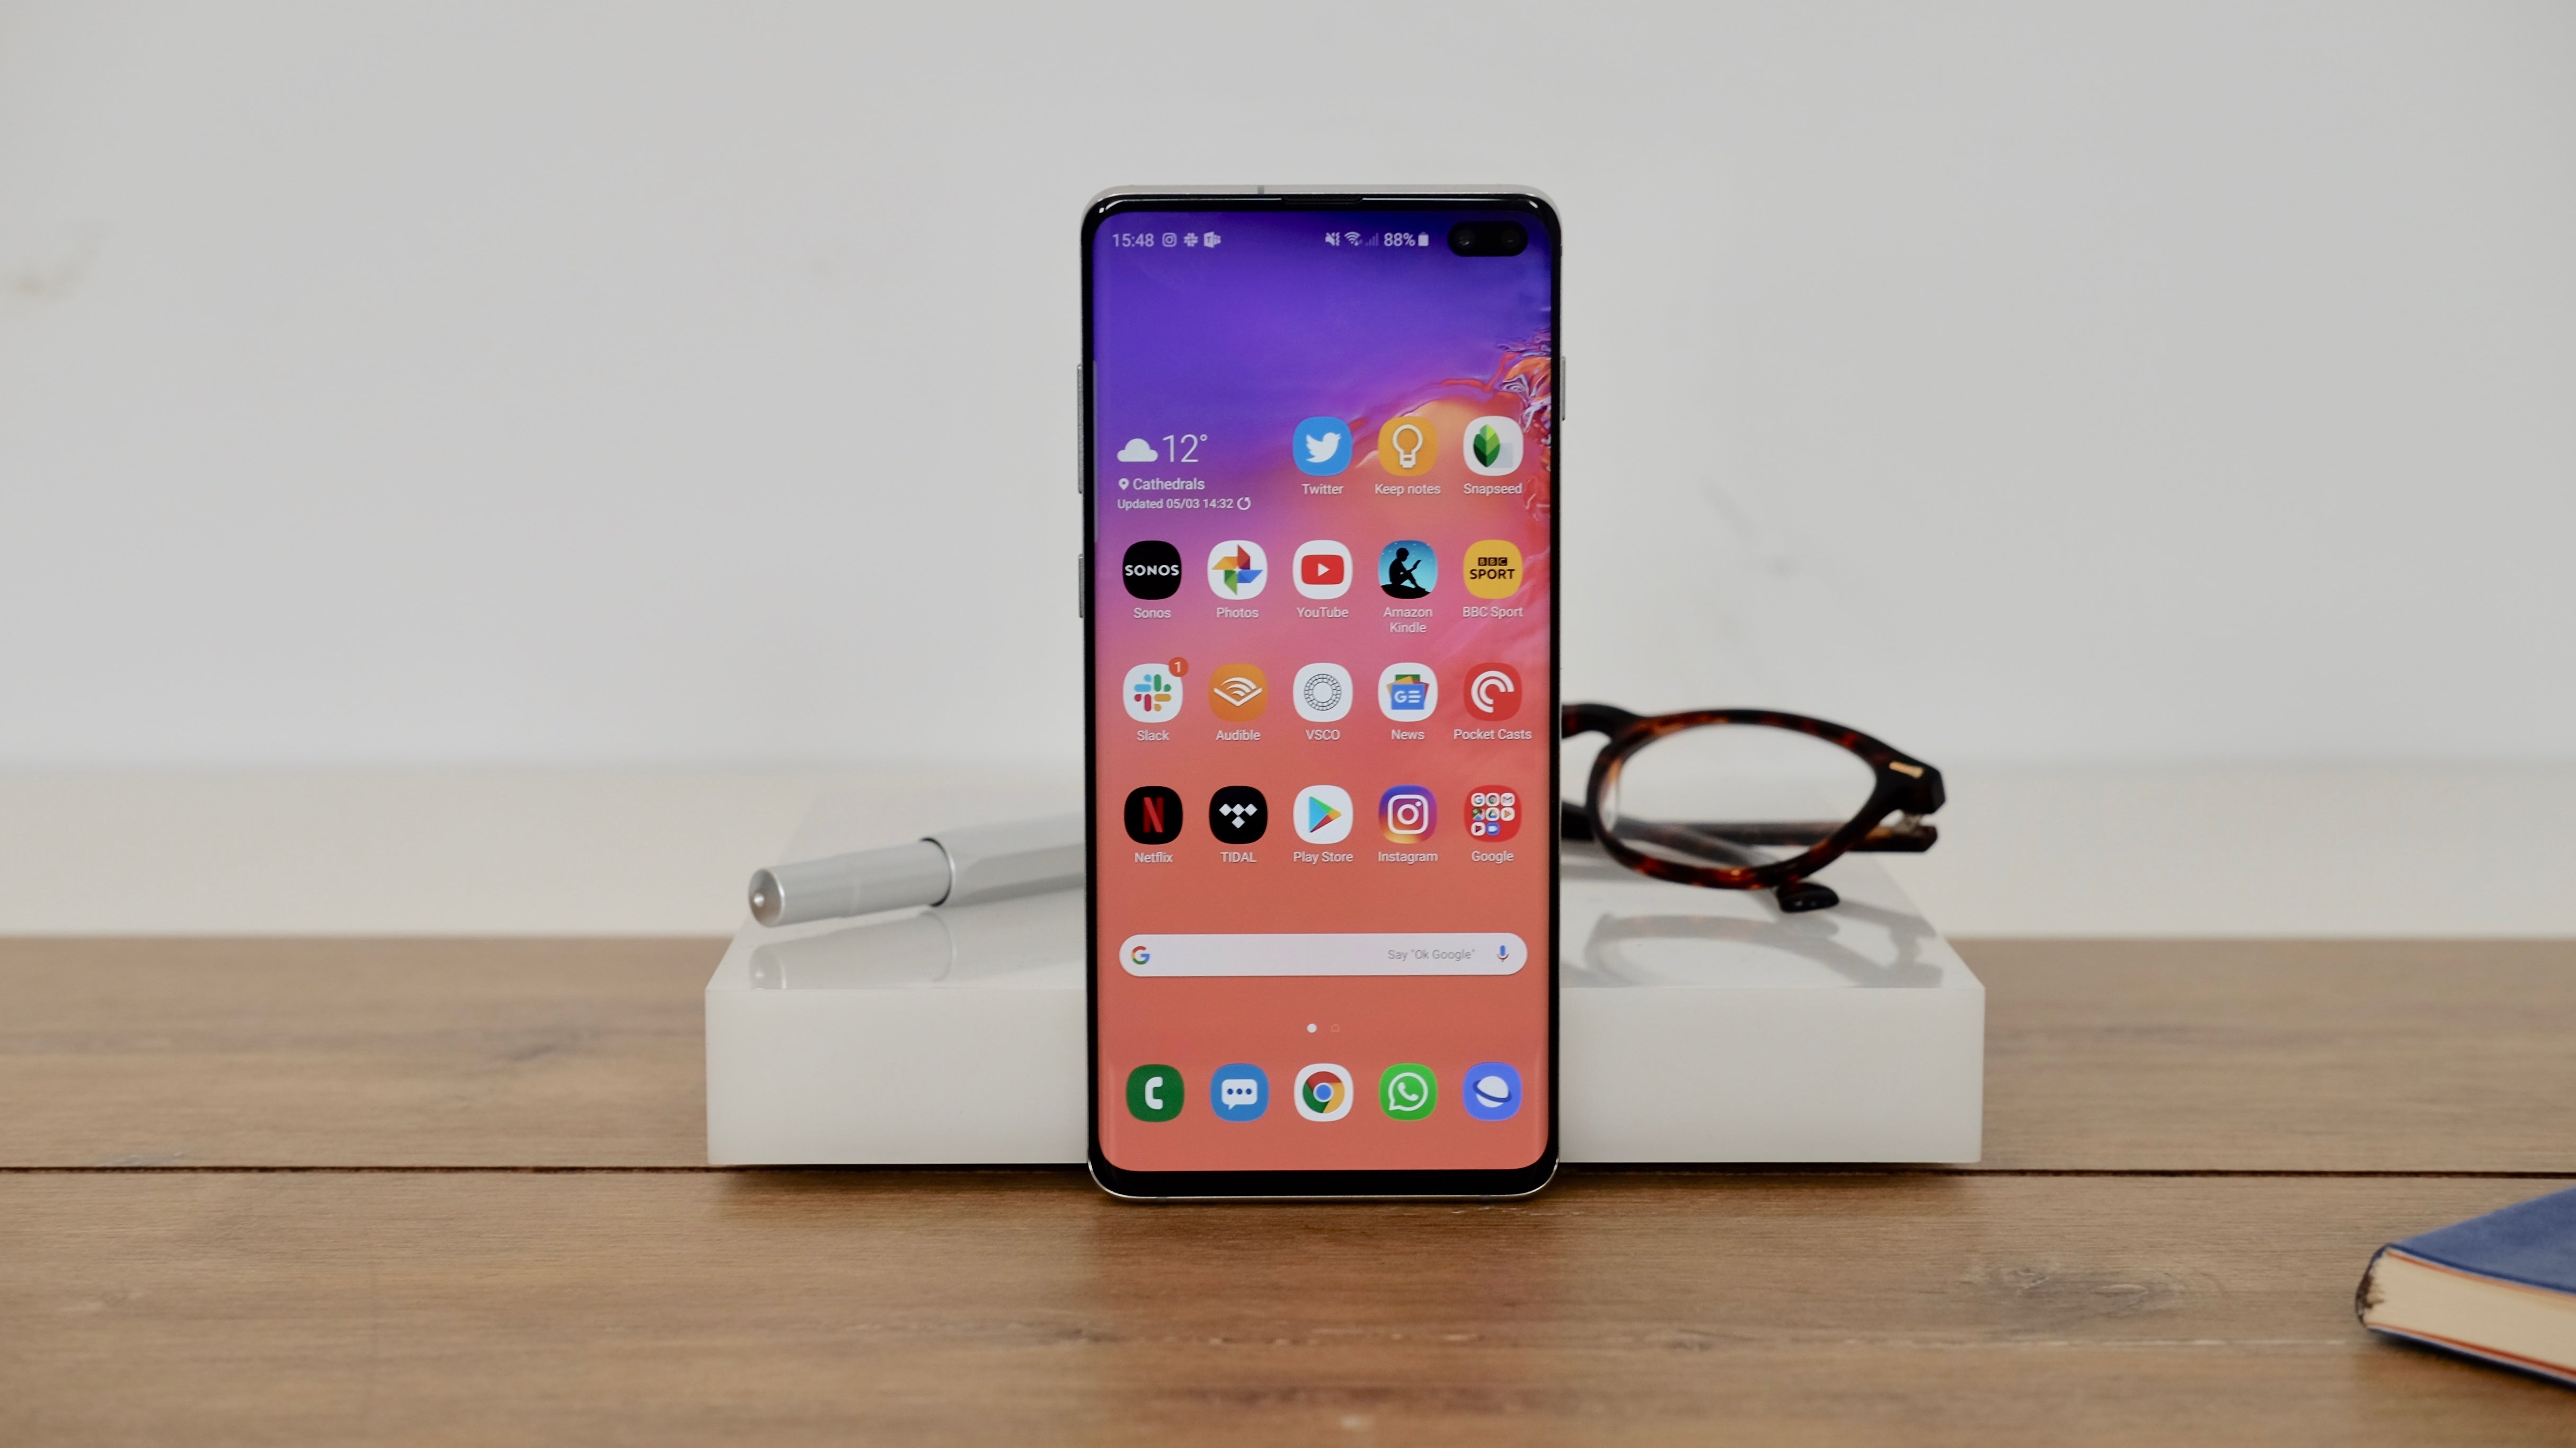 Samsung Galaxy S10 Plus Review: a phone you'll love | Trusted Reviews